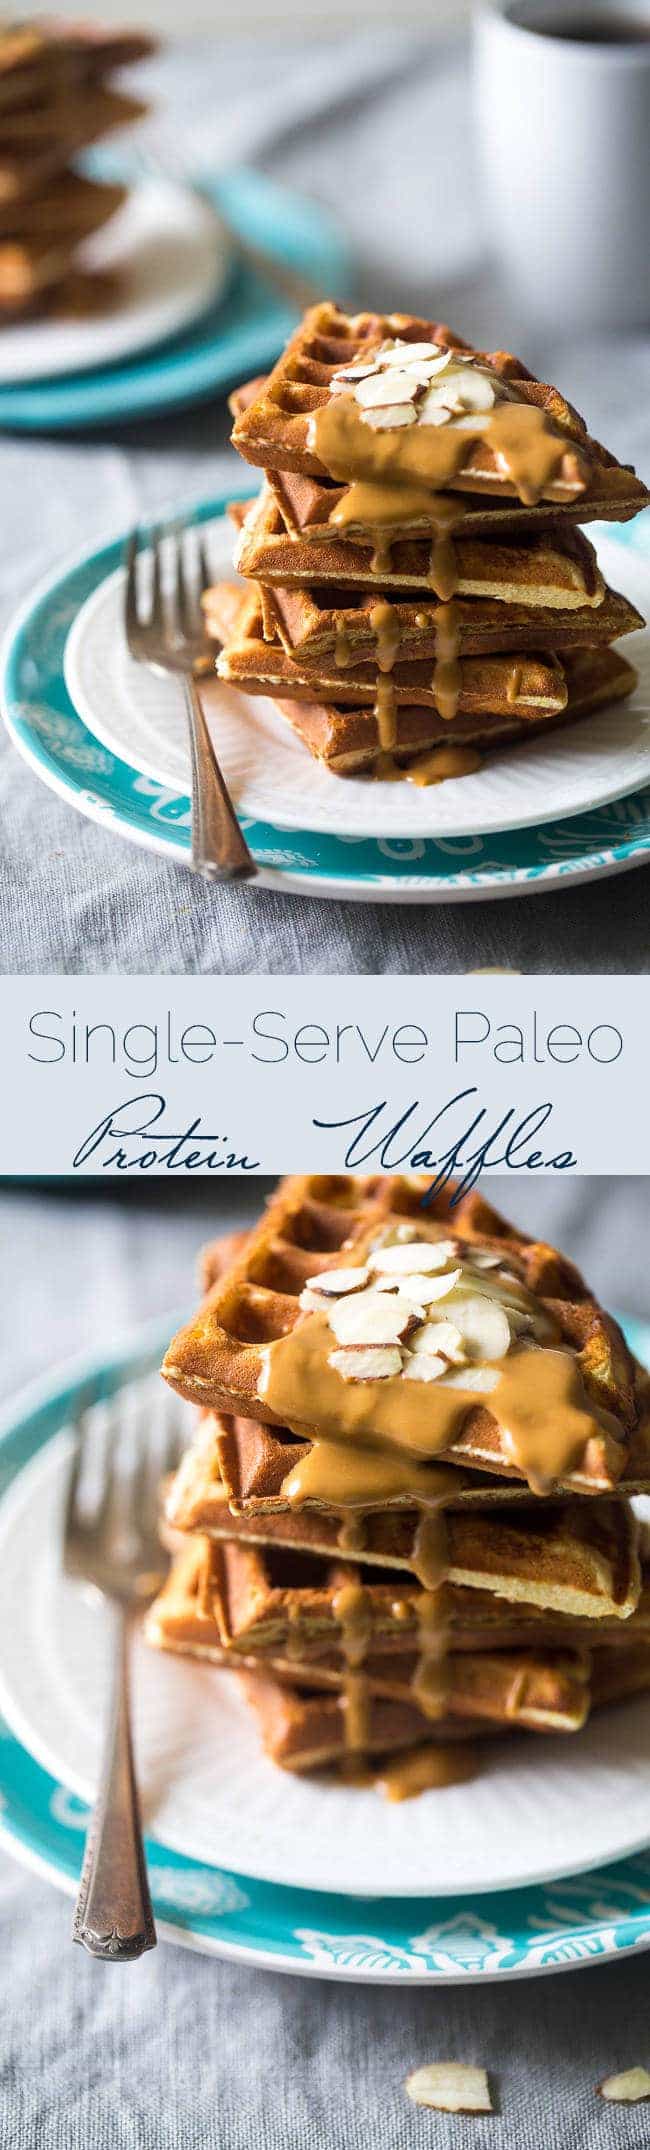 Paleo Protein Waffles - Single serve, packed with protein, and are ready in 5 minutes so you can have healthy. gluten free waffles any day of the week! | Foodfaithfitness.com | @FoodFaithFit